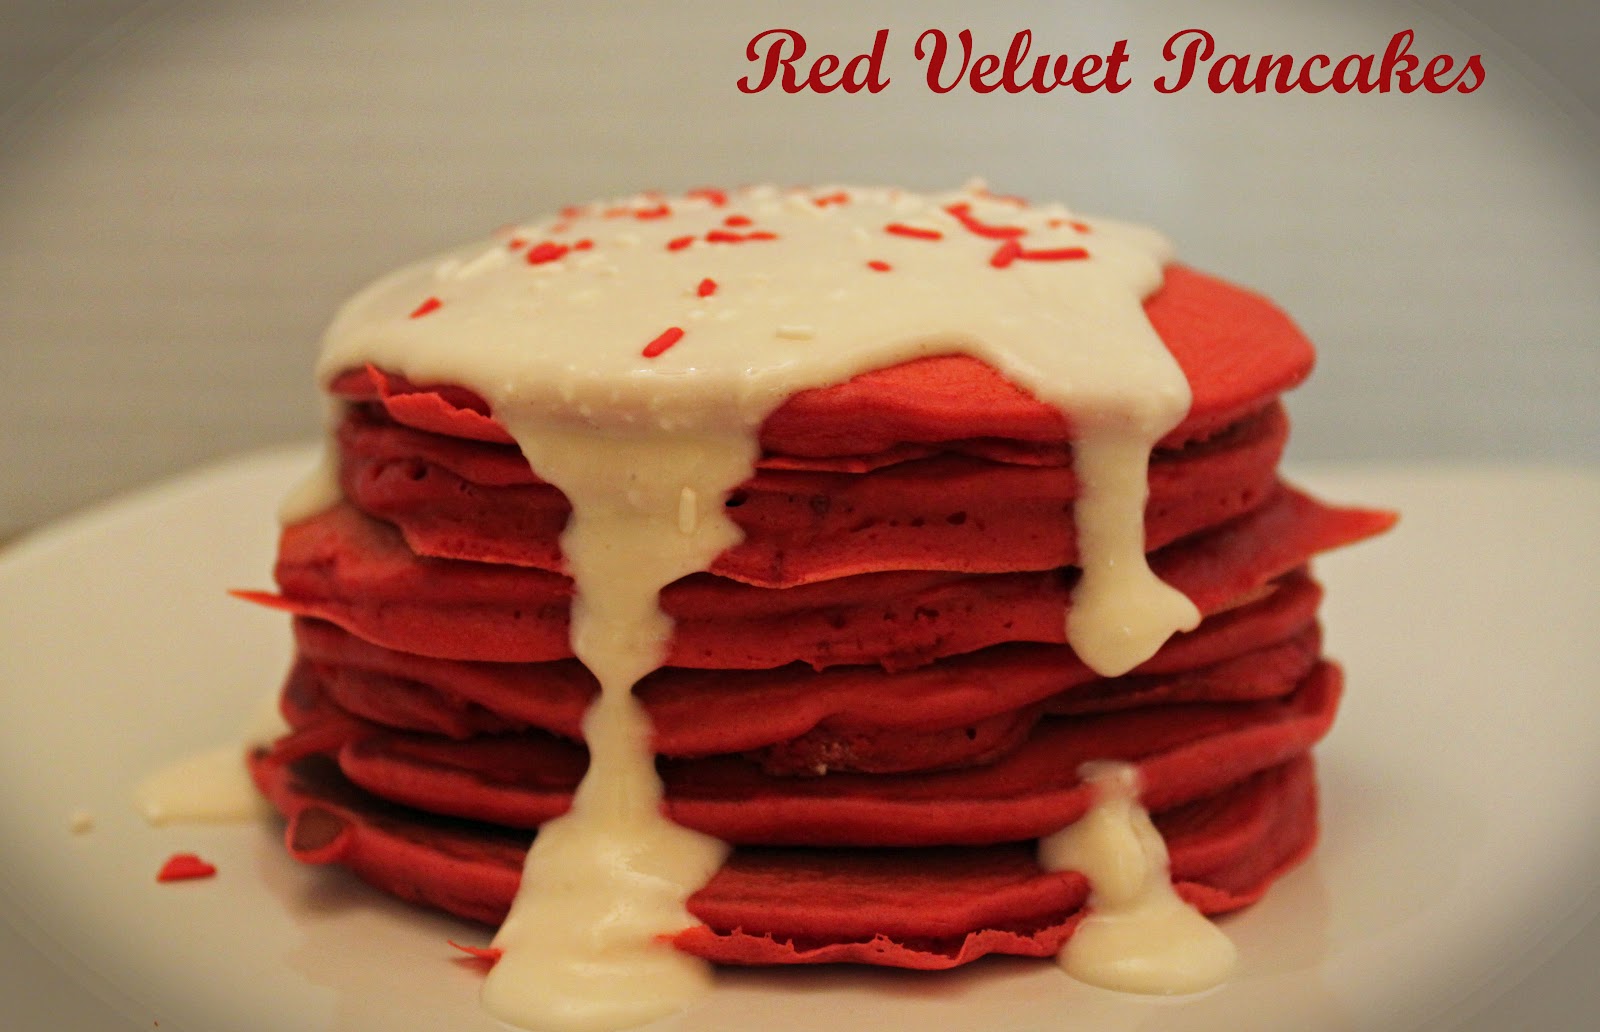 with pancakes  to Velvet make cake Girls mix in Cream Cheese Syrup velvet red Aprons: with Pancakes Frosting how Red